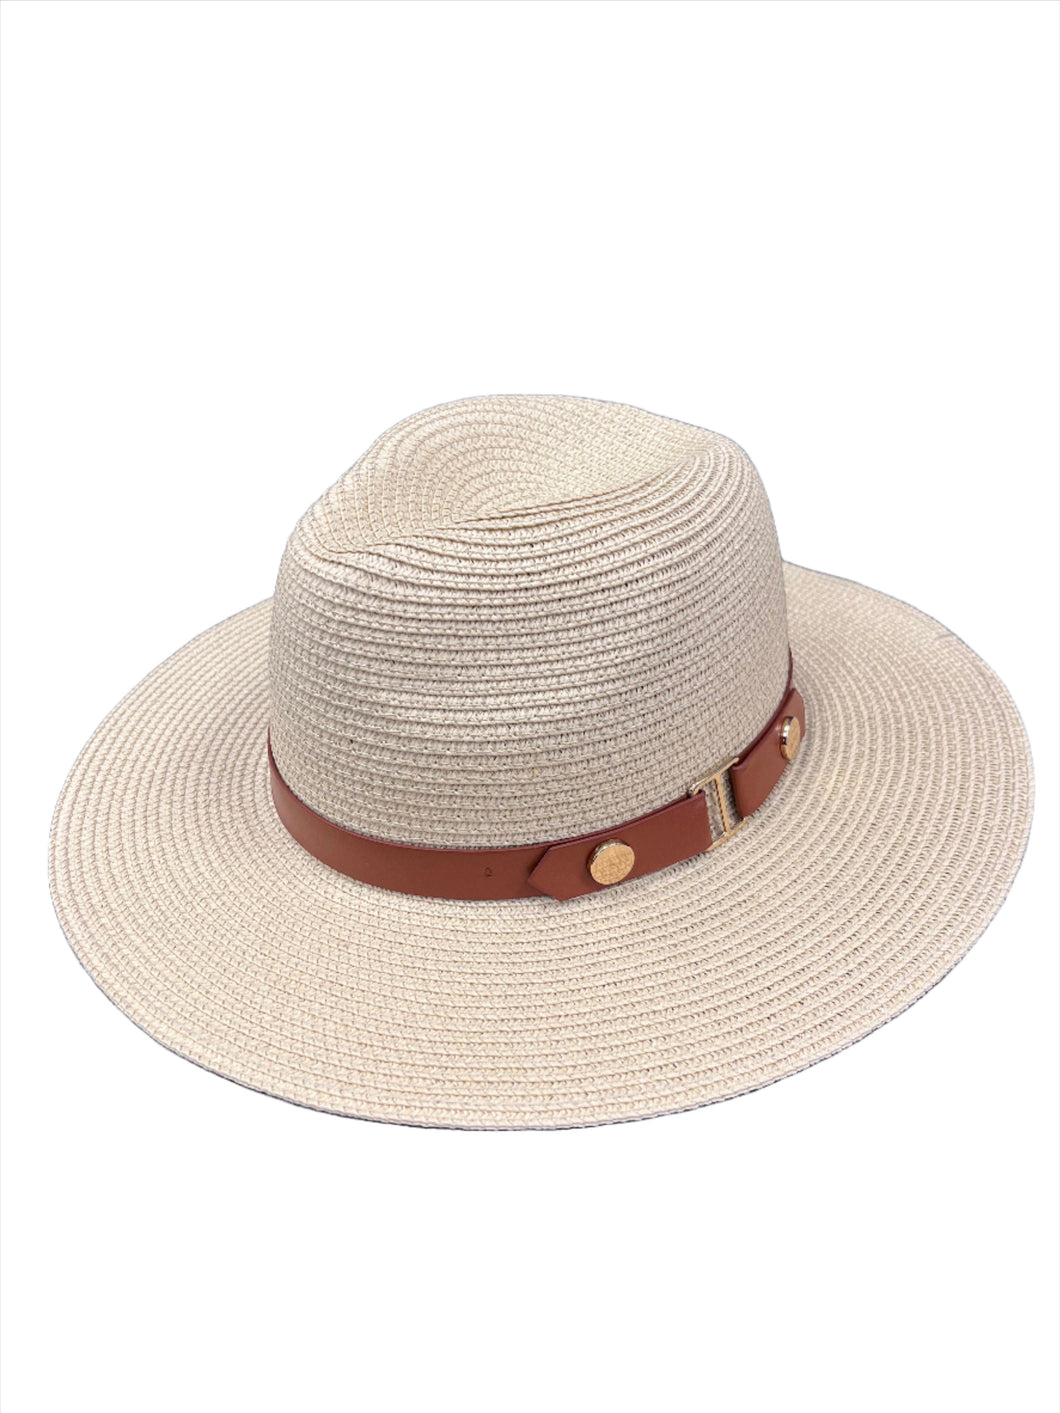 Panama Straw Sun Hat With Buckle Detailing